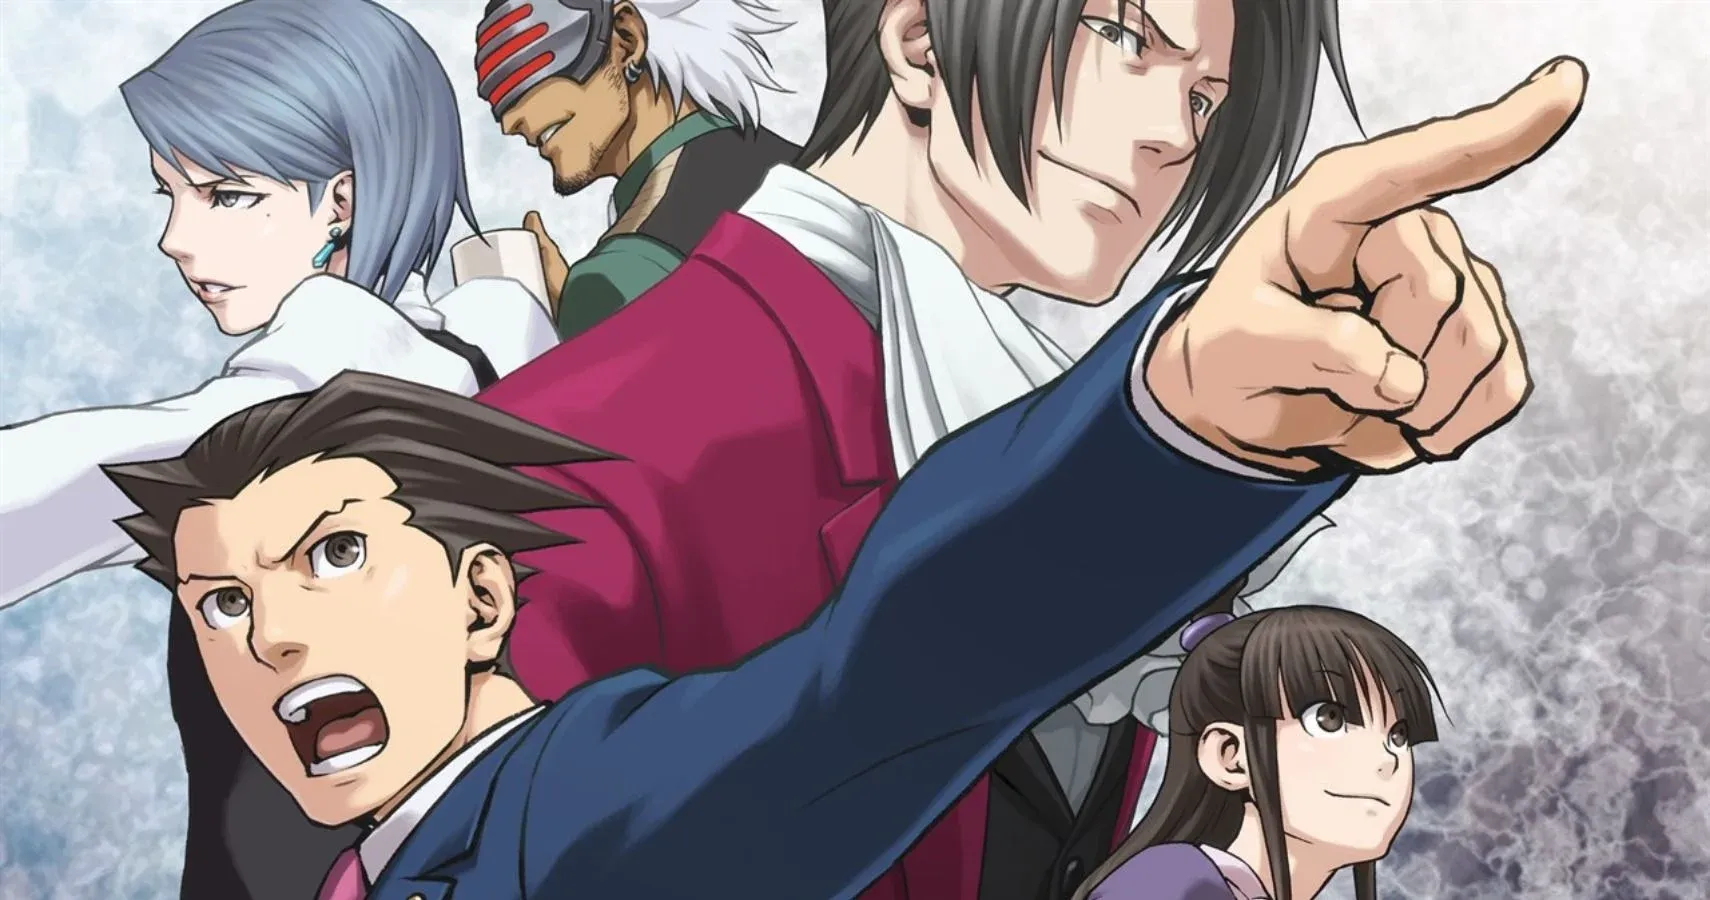 Ace Attorney Anime Trailer Gives Us A Glimpse Of Whats To Come  Siliconera